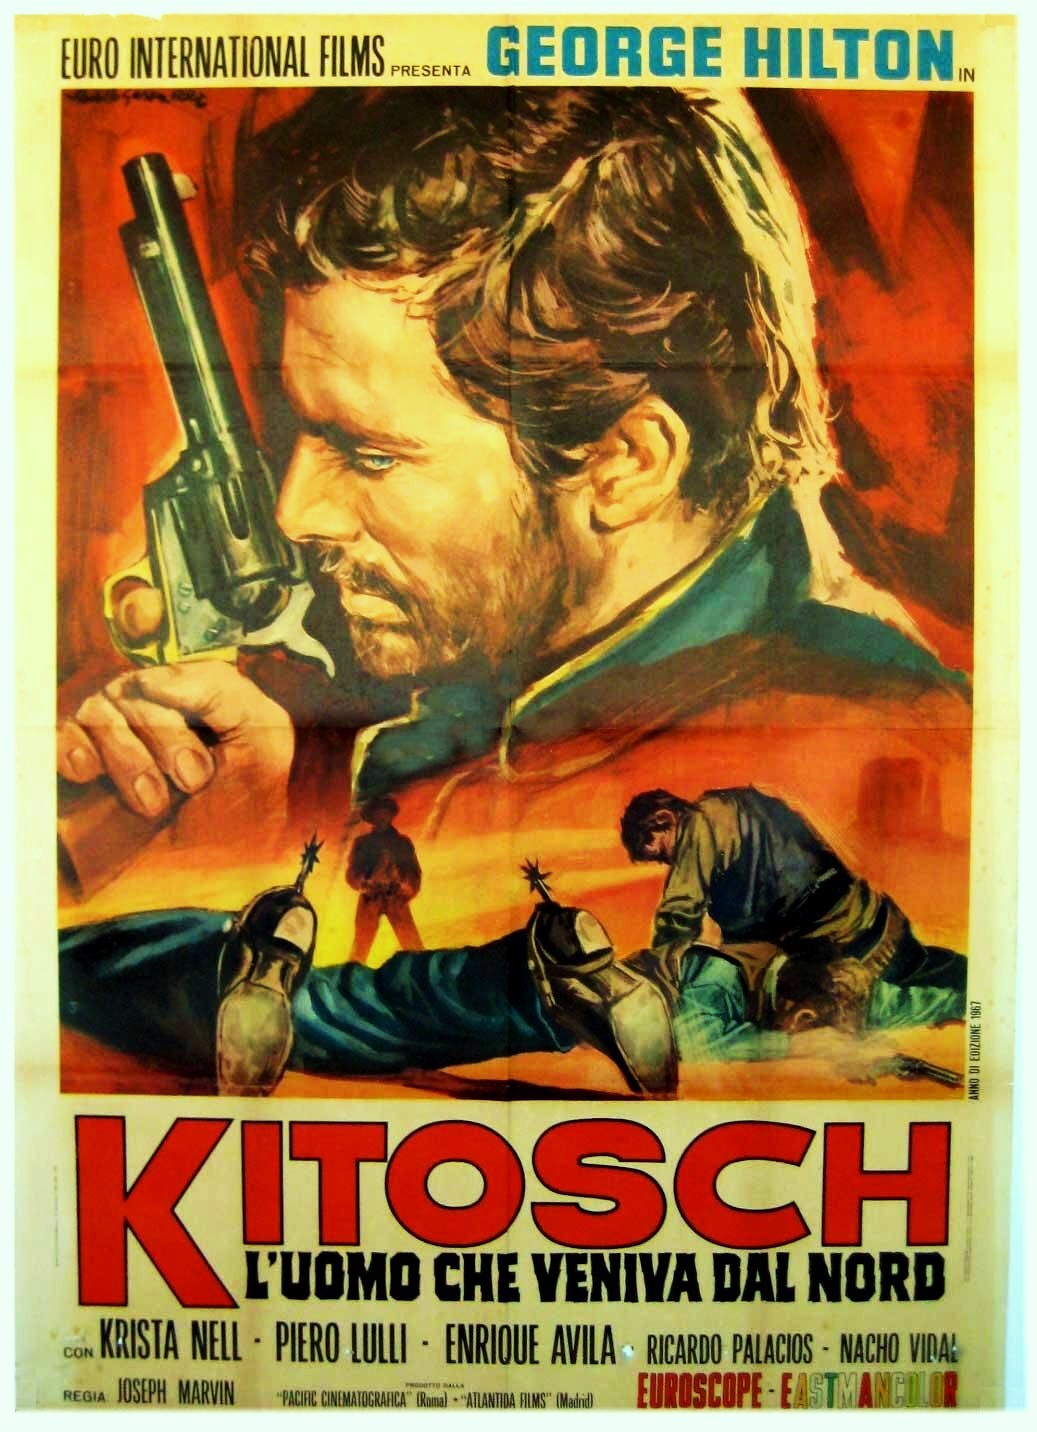 Kitosch, the Man Who Came from the North (1967) Screenshot 5